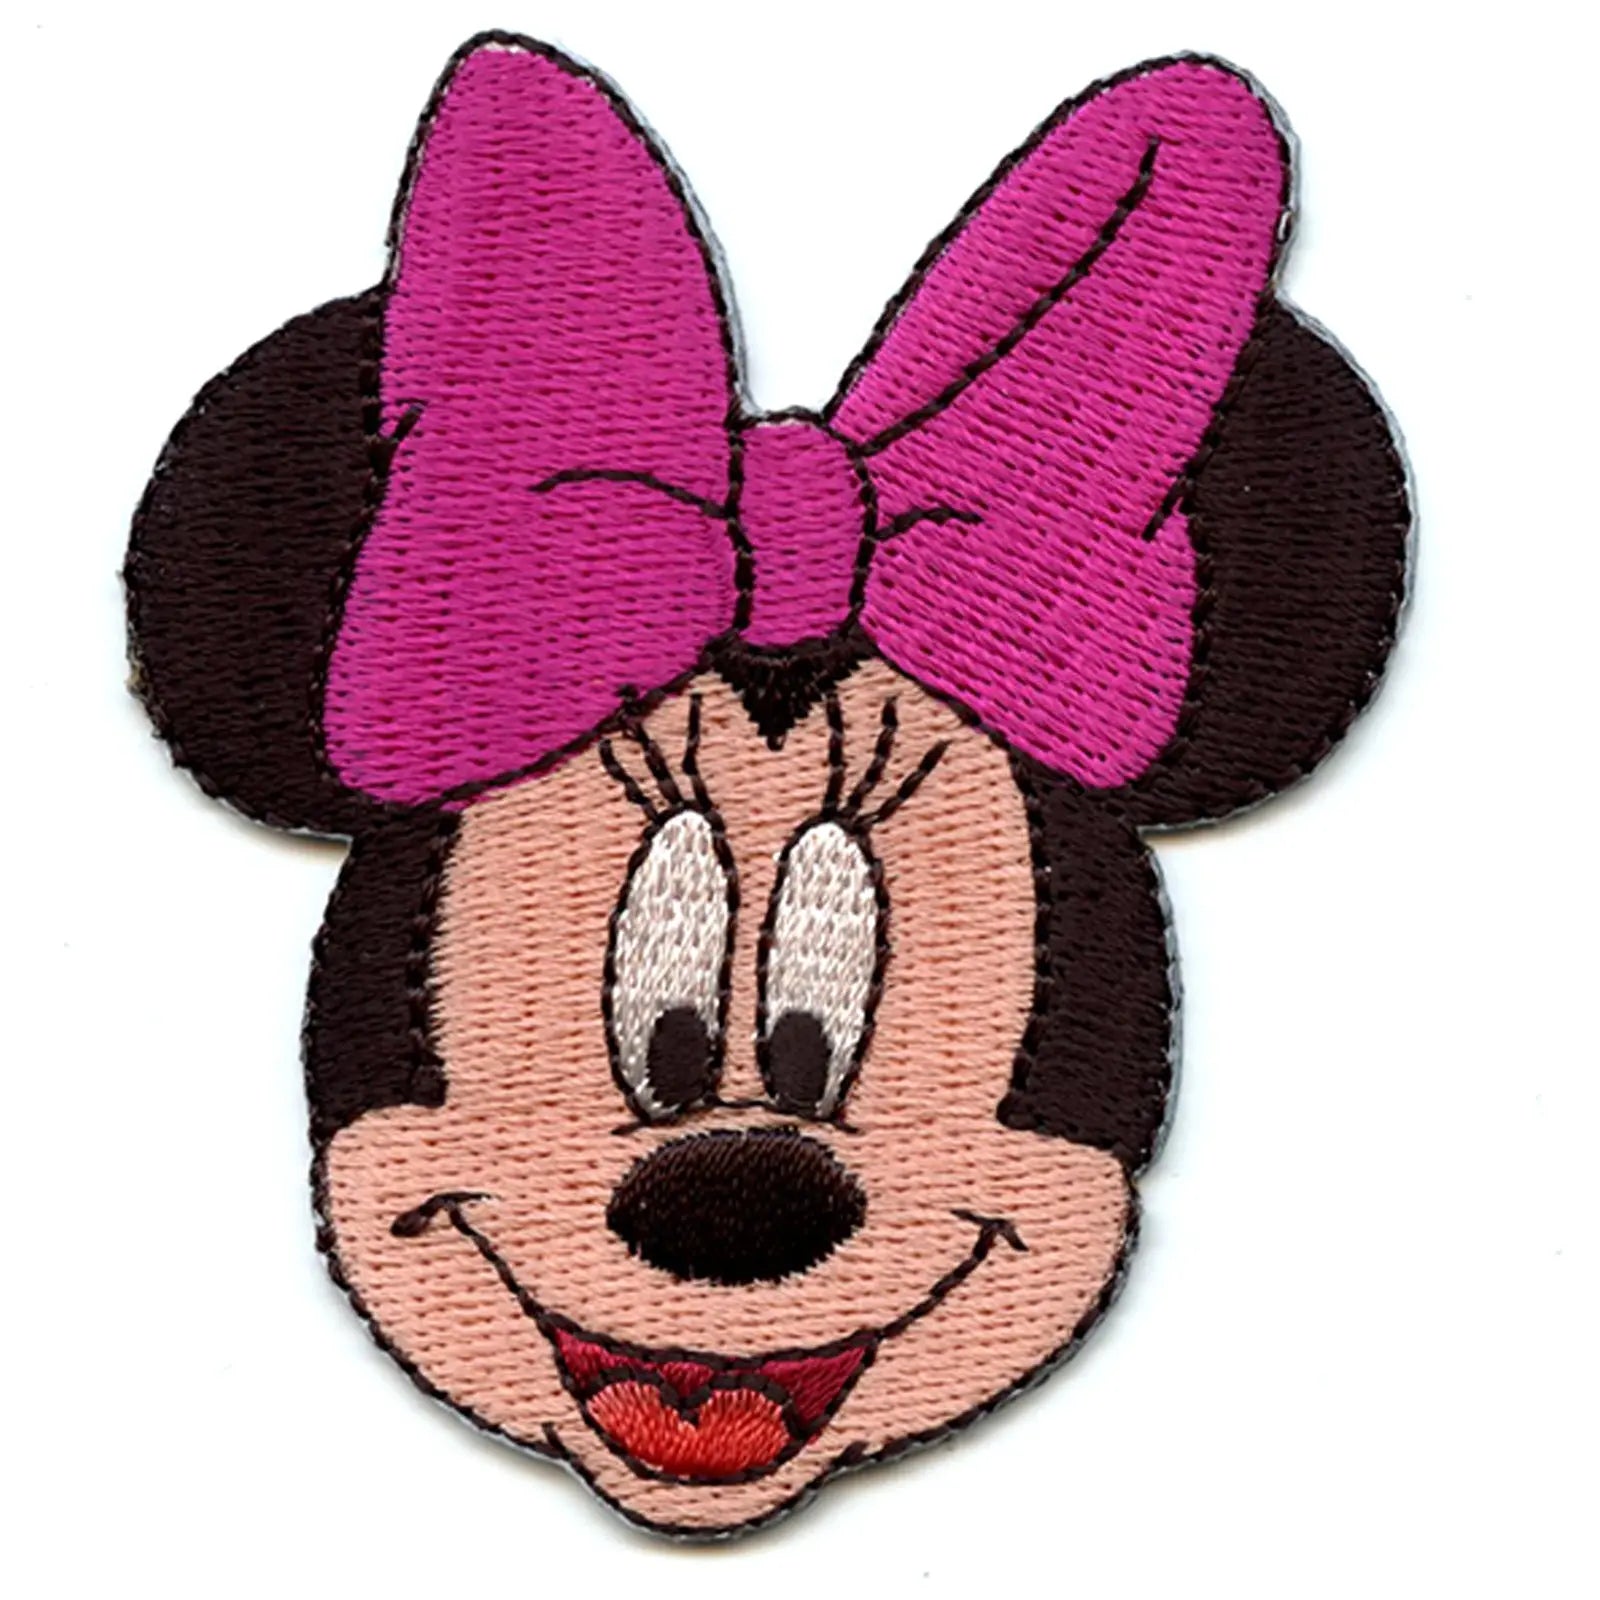 1 PC - 2 ⁵³/₆₄” Disney Minnie Mouse Iron On Embroidered Patches Appliqués